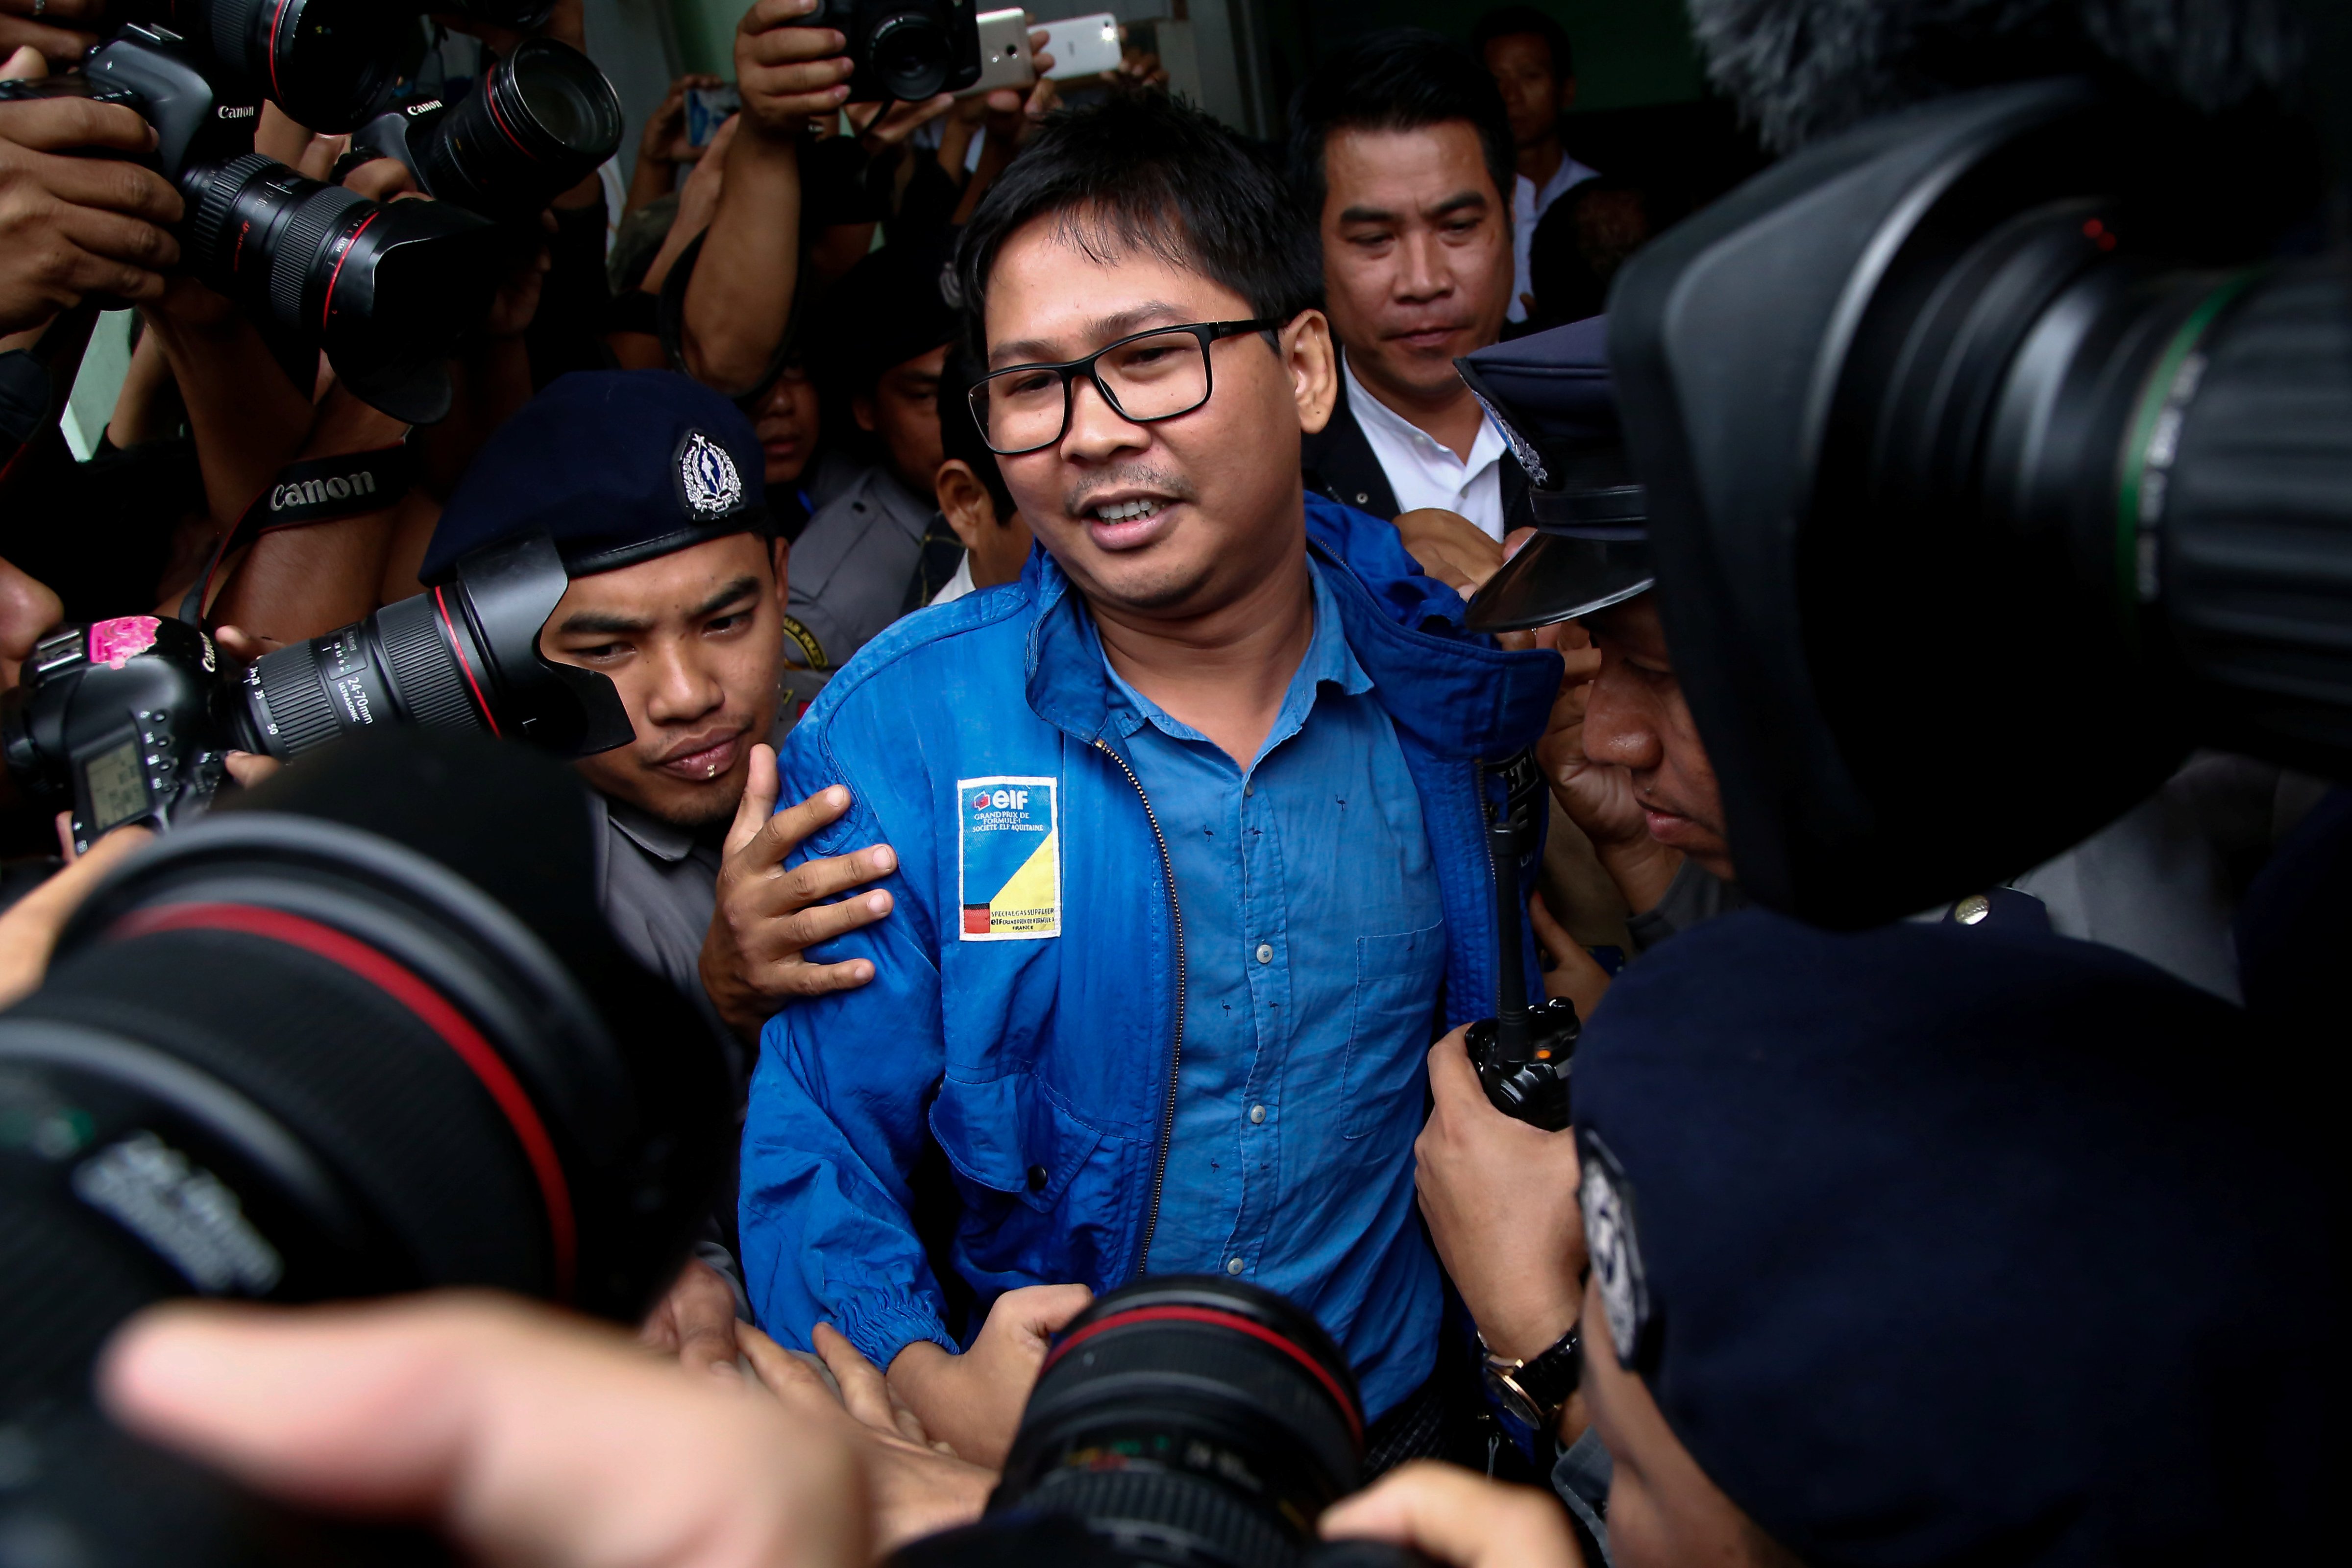 Reuters reporter Wa Lone talks to reporters as he leaves court in Yangon